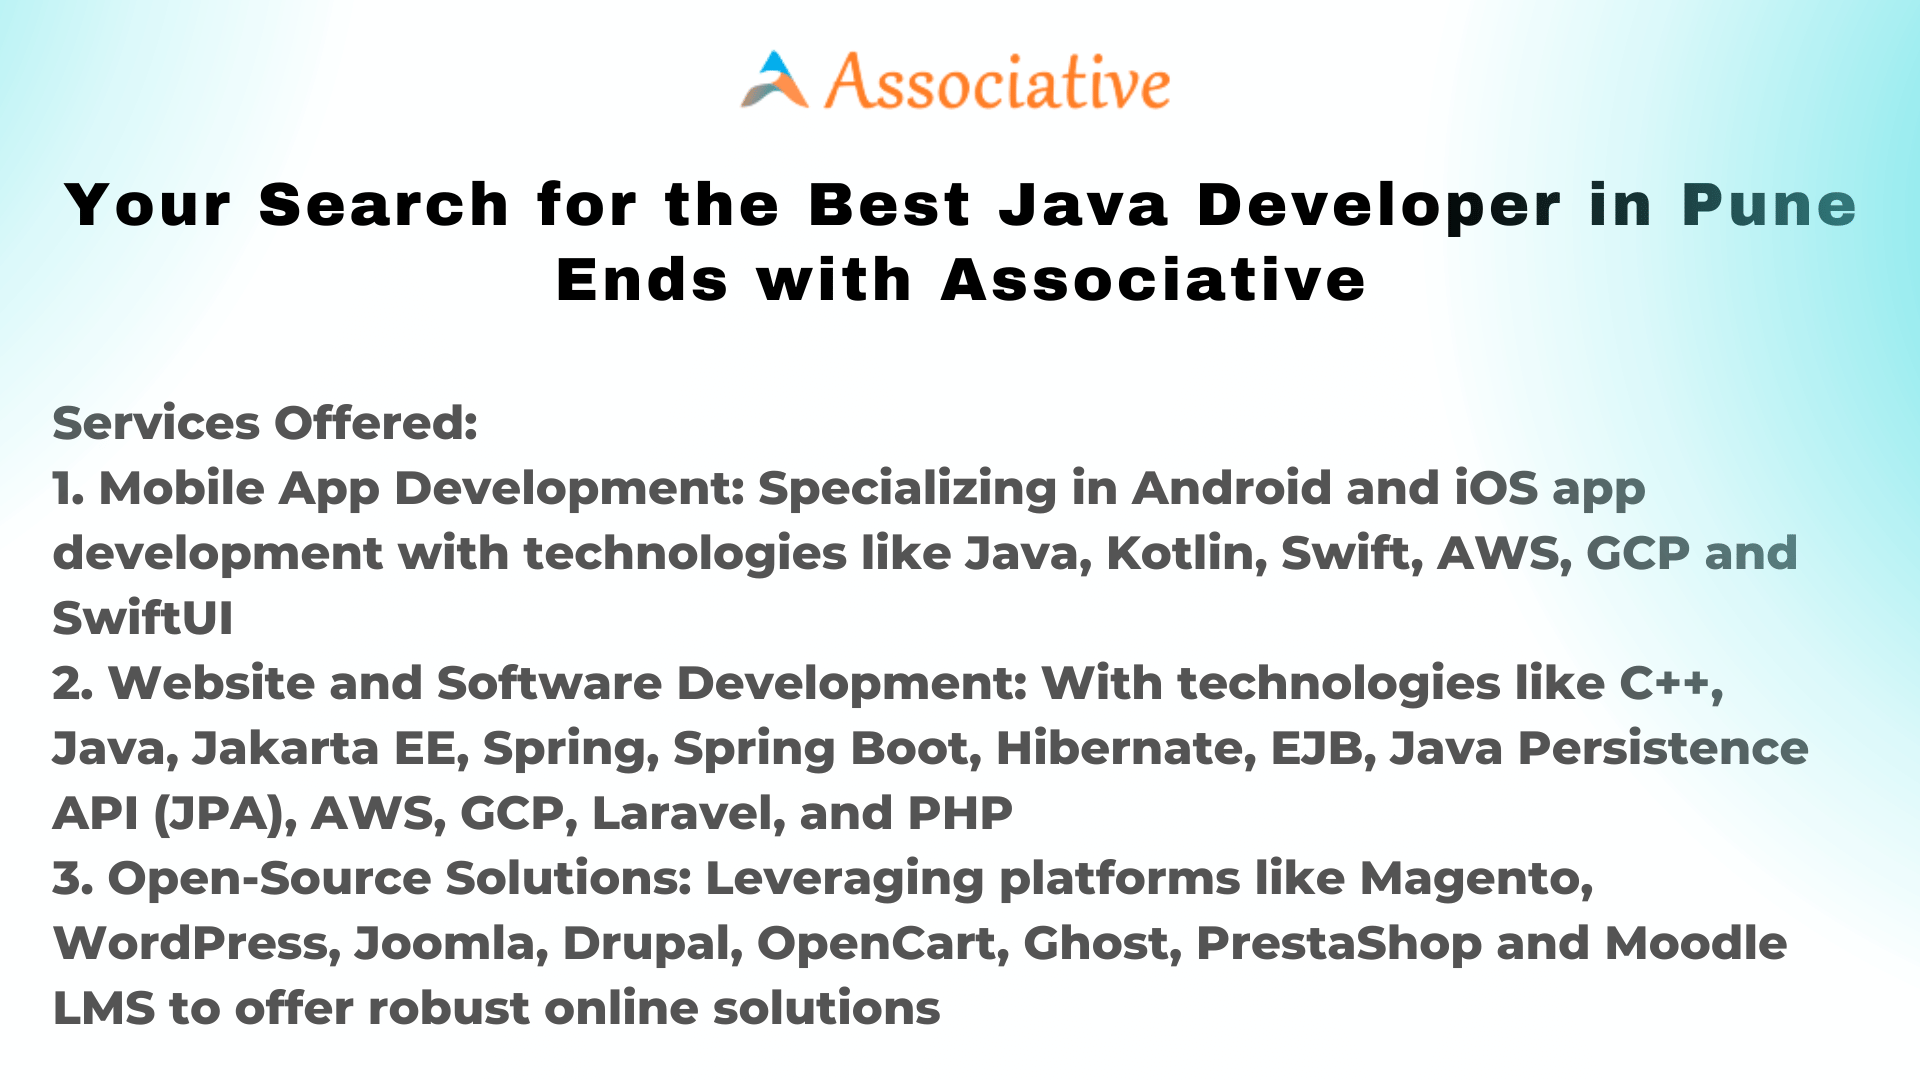 Your Search for the Best Java Developer in Pune Ends with Associative